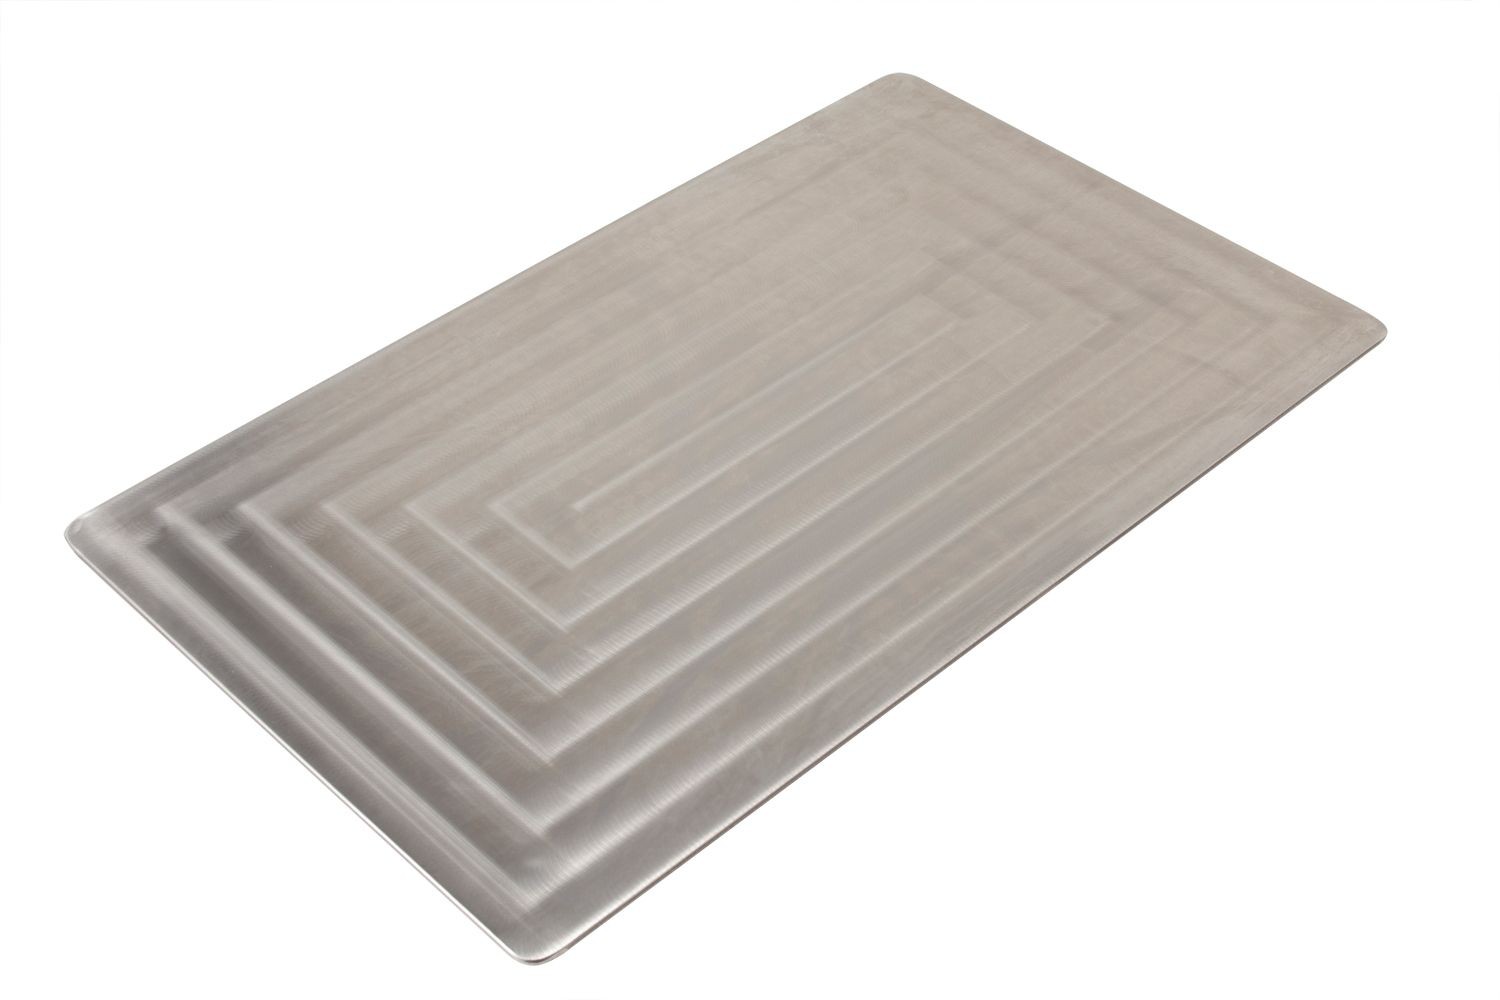 Bon Chef 52101 EZ Fit Rectangle Stainless Steel Full Size Tile, 12 3/4" x 20 13/16"